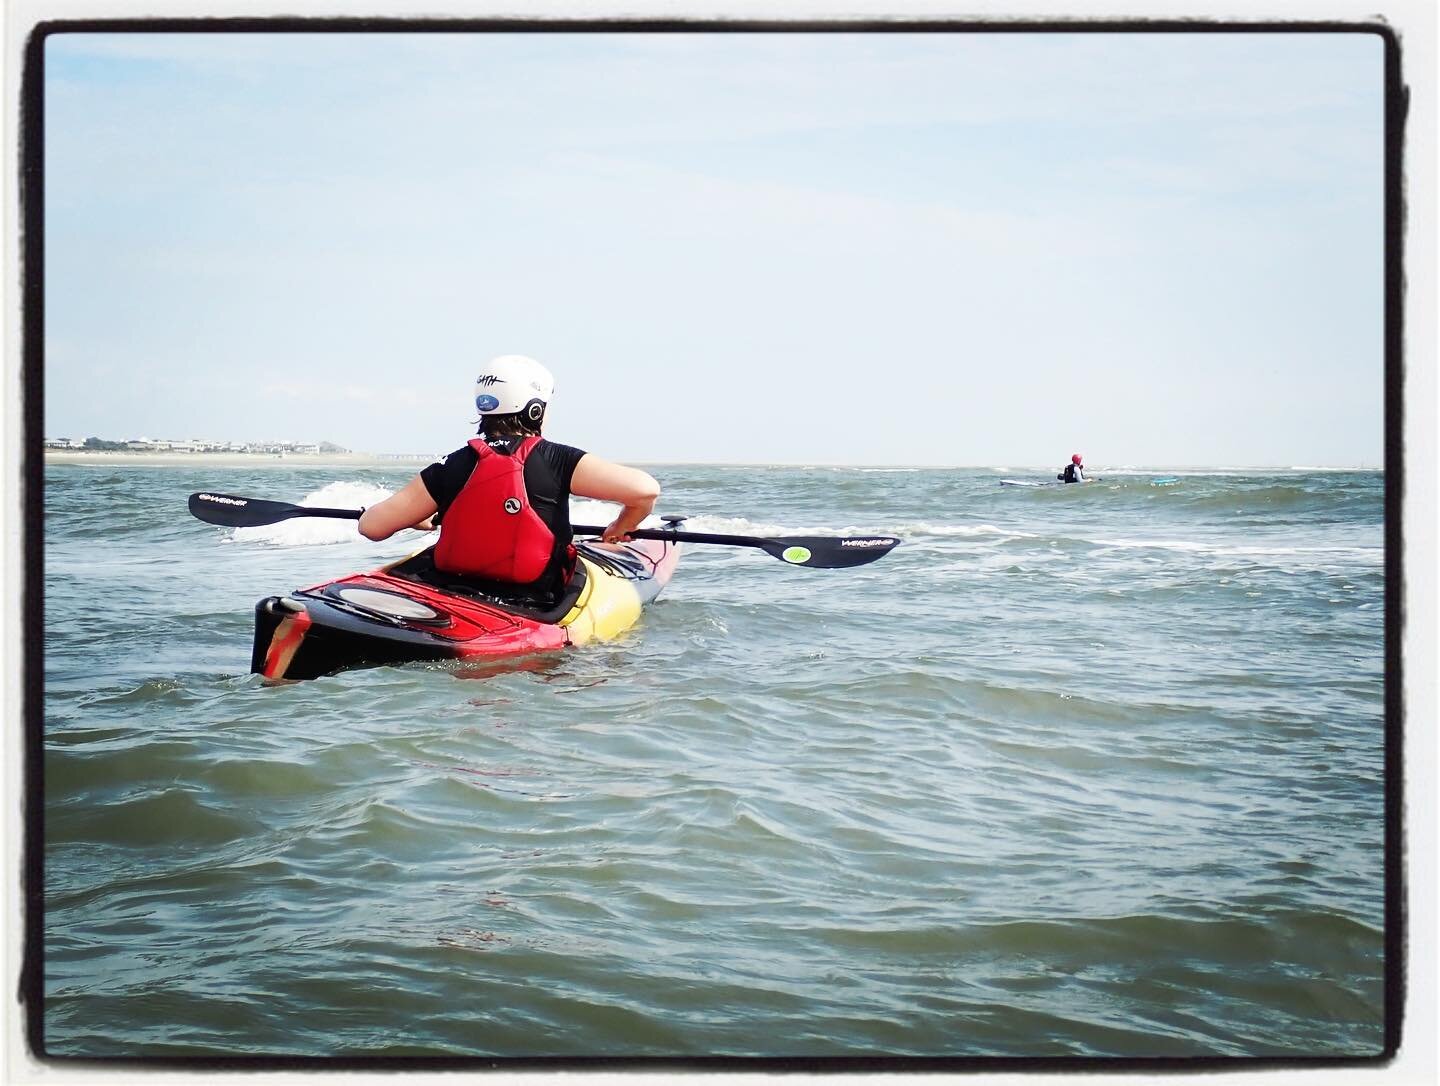 Sunday&rsquo;s L3 with Cody and Ellen.
What is Level 3.
L3 is positive edge control, blade awareness and confidence in your low brace. #kayak #paddle #instruction #shelterinplace #savannah #georgiacoast